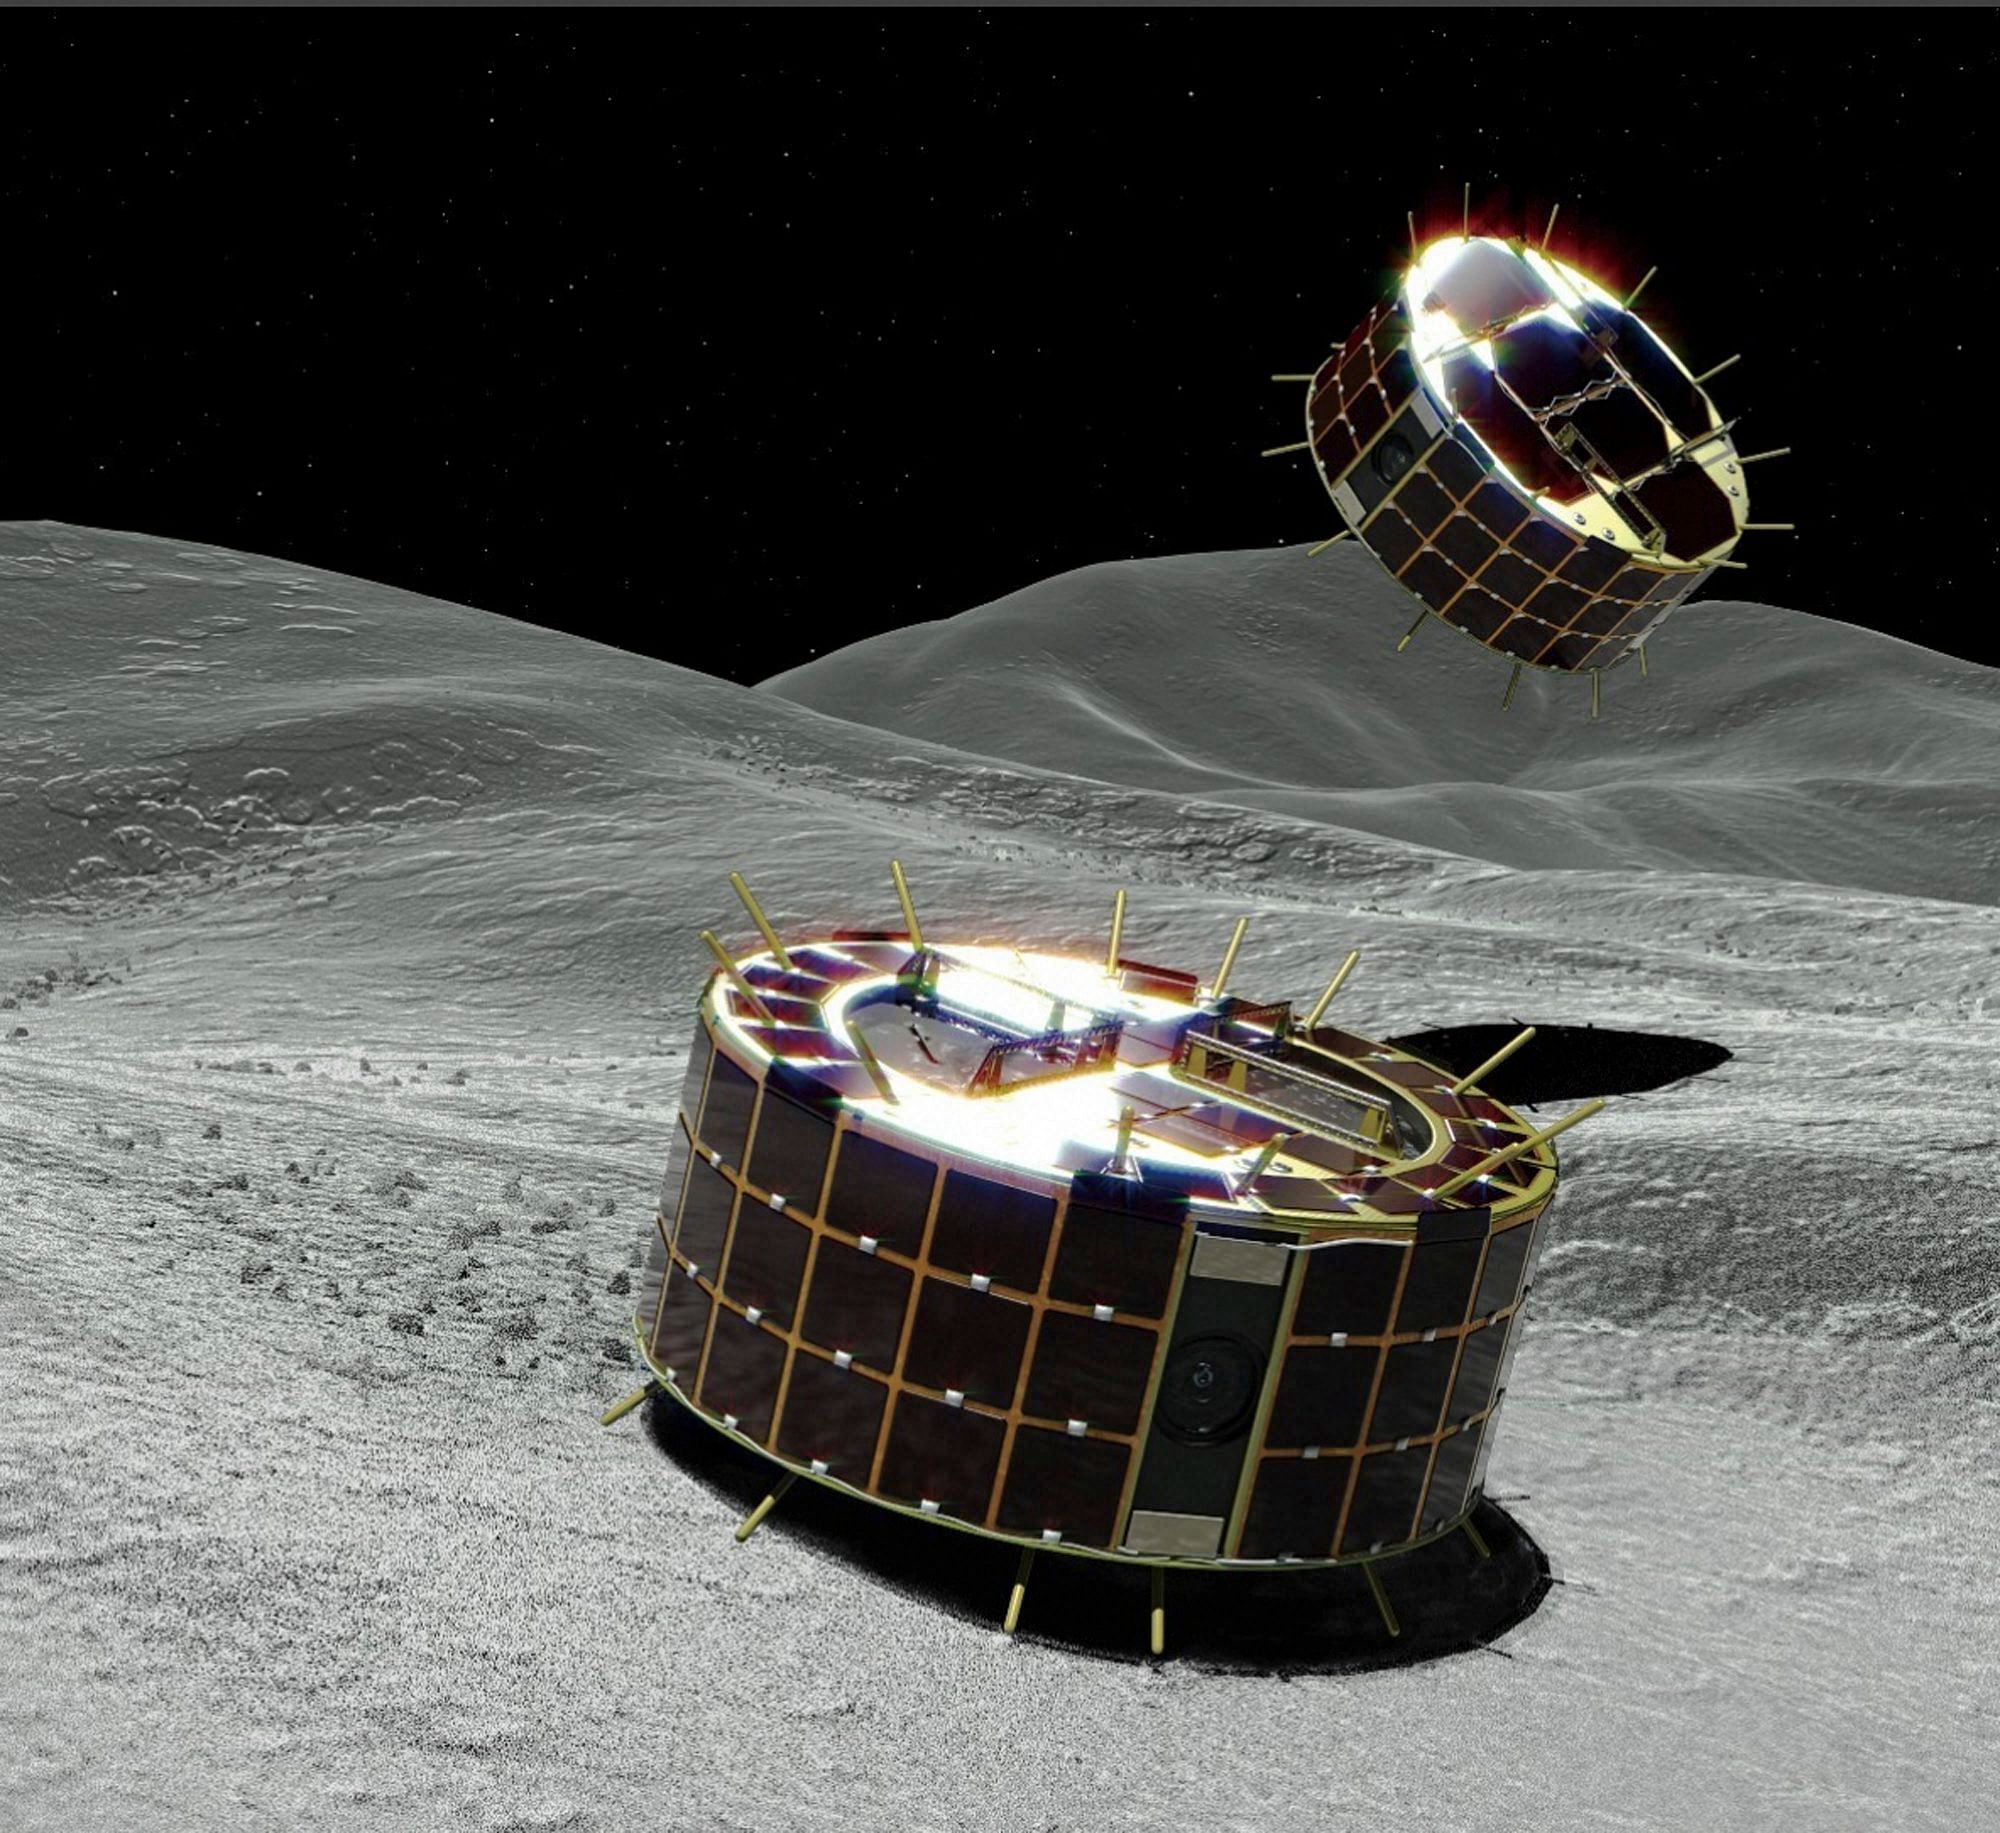 JAXA : This computer graphic image provided by the Japan Aerospace Exploration Agency (JAXA) shows two drum-shaped and solar-powered Minerva-II-1 rovers on an asteroid. Japanese unmanned spacecraft Hayabusa2 released two small Minerva-II-1 rovers on the asteroid Ryugu on Friday, Sept. 21, 2018, in a research effort that may provide clues to the origin of the solar system. JAXA said confirmation of the rovers' touchdown has to wait until it receives data from them on Saturday. Credit: AP/PTI